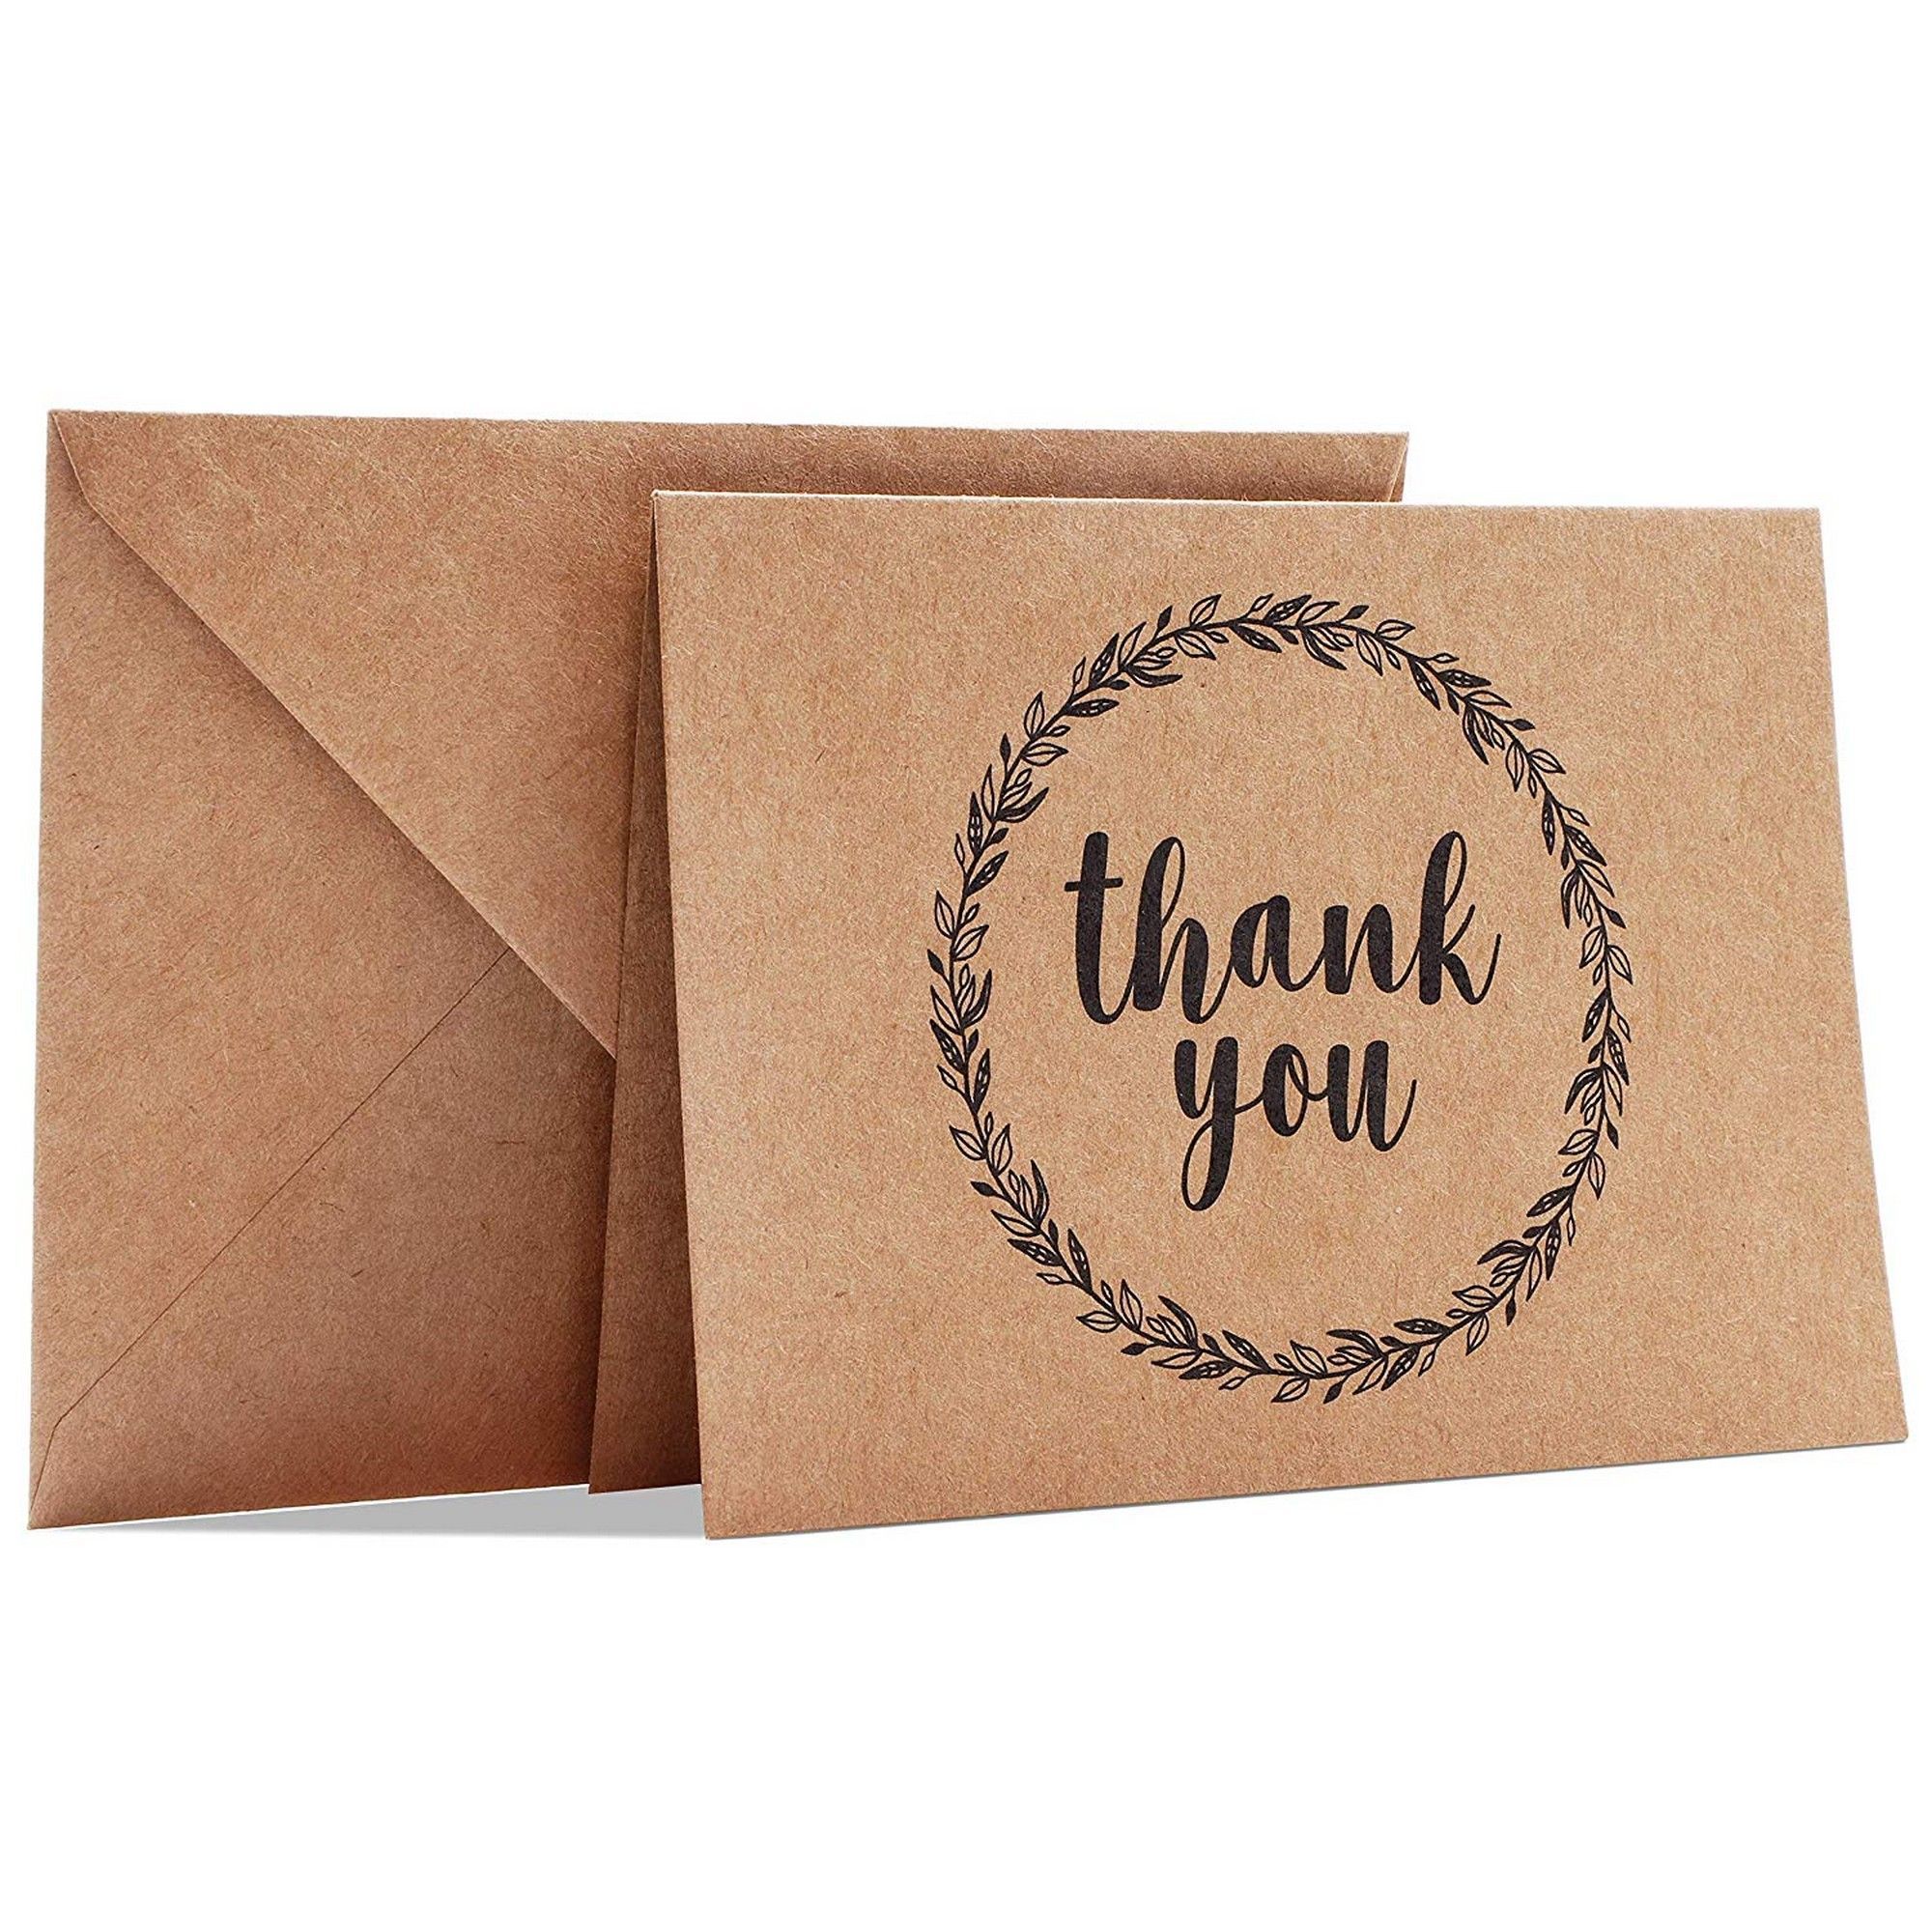 Engagement Party Ideal Thank You Note Cards For Weddings Bridal Shower Engagement Ring Thank You Cards /& Envelopes FREE SHIPPING